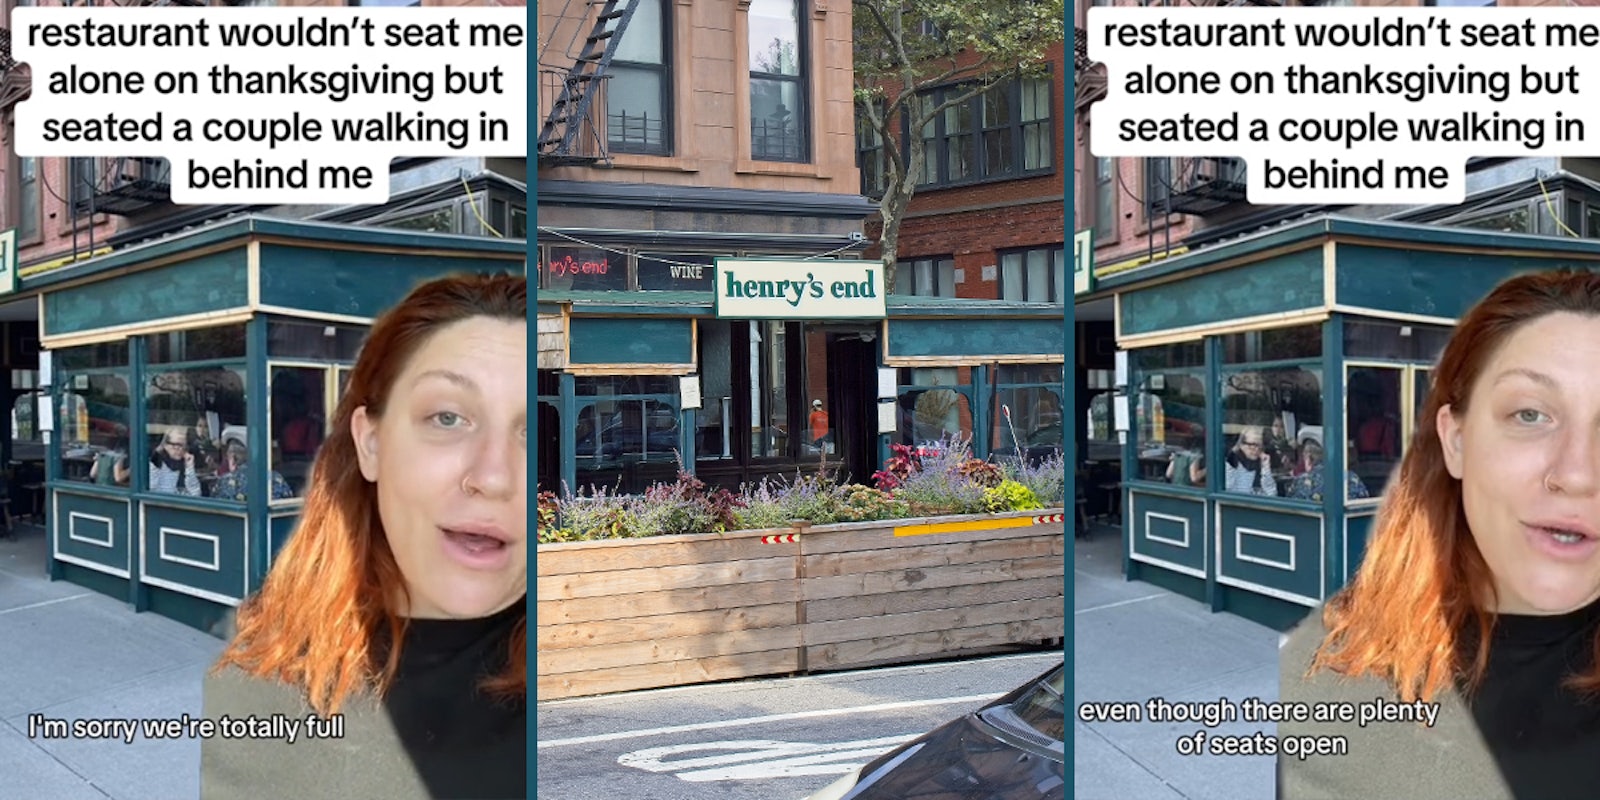 woman greenscreen TikTok over image of Henry's End restaurant exterior with caption 'restaurant wouldn't seat me alone on thanksgiving but seated a couple walking in behind me' 'I'm sorry we're totally full' (l) Henry's End restaurant exterior with sign (c) woman greenscreen TikTok over image of Henry's End restaurant exterior with caption 'restaurant wouldn't seat me alone on thanksgiving but seated a couple walking in behind me' 'even though there are plenty of seats open' (r)